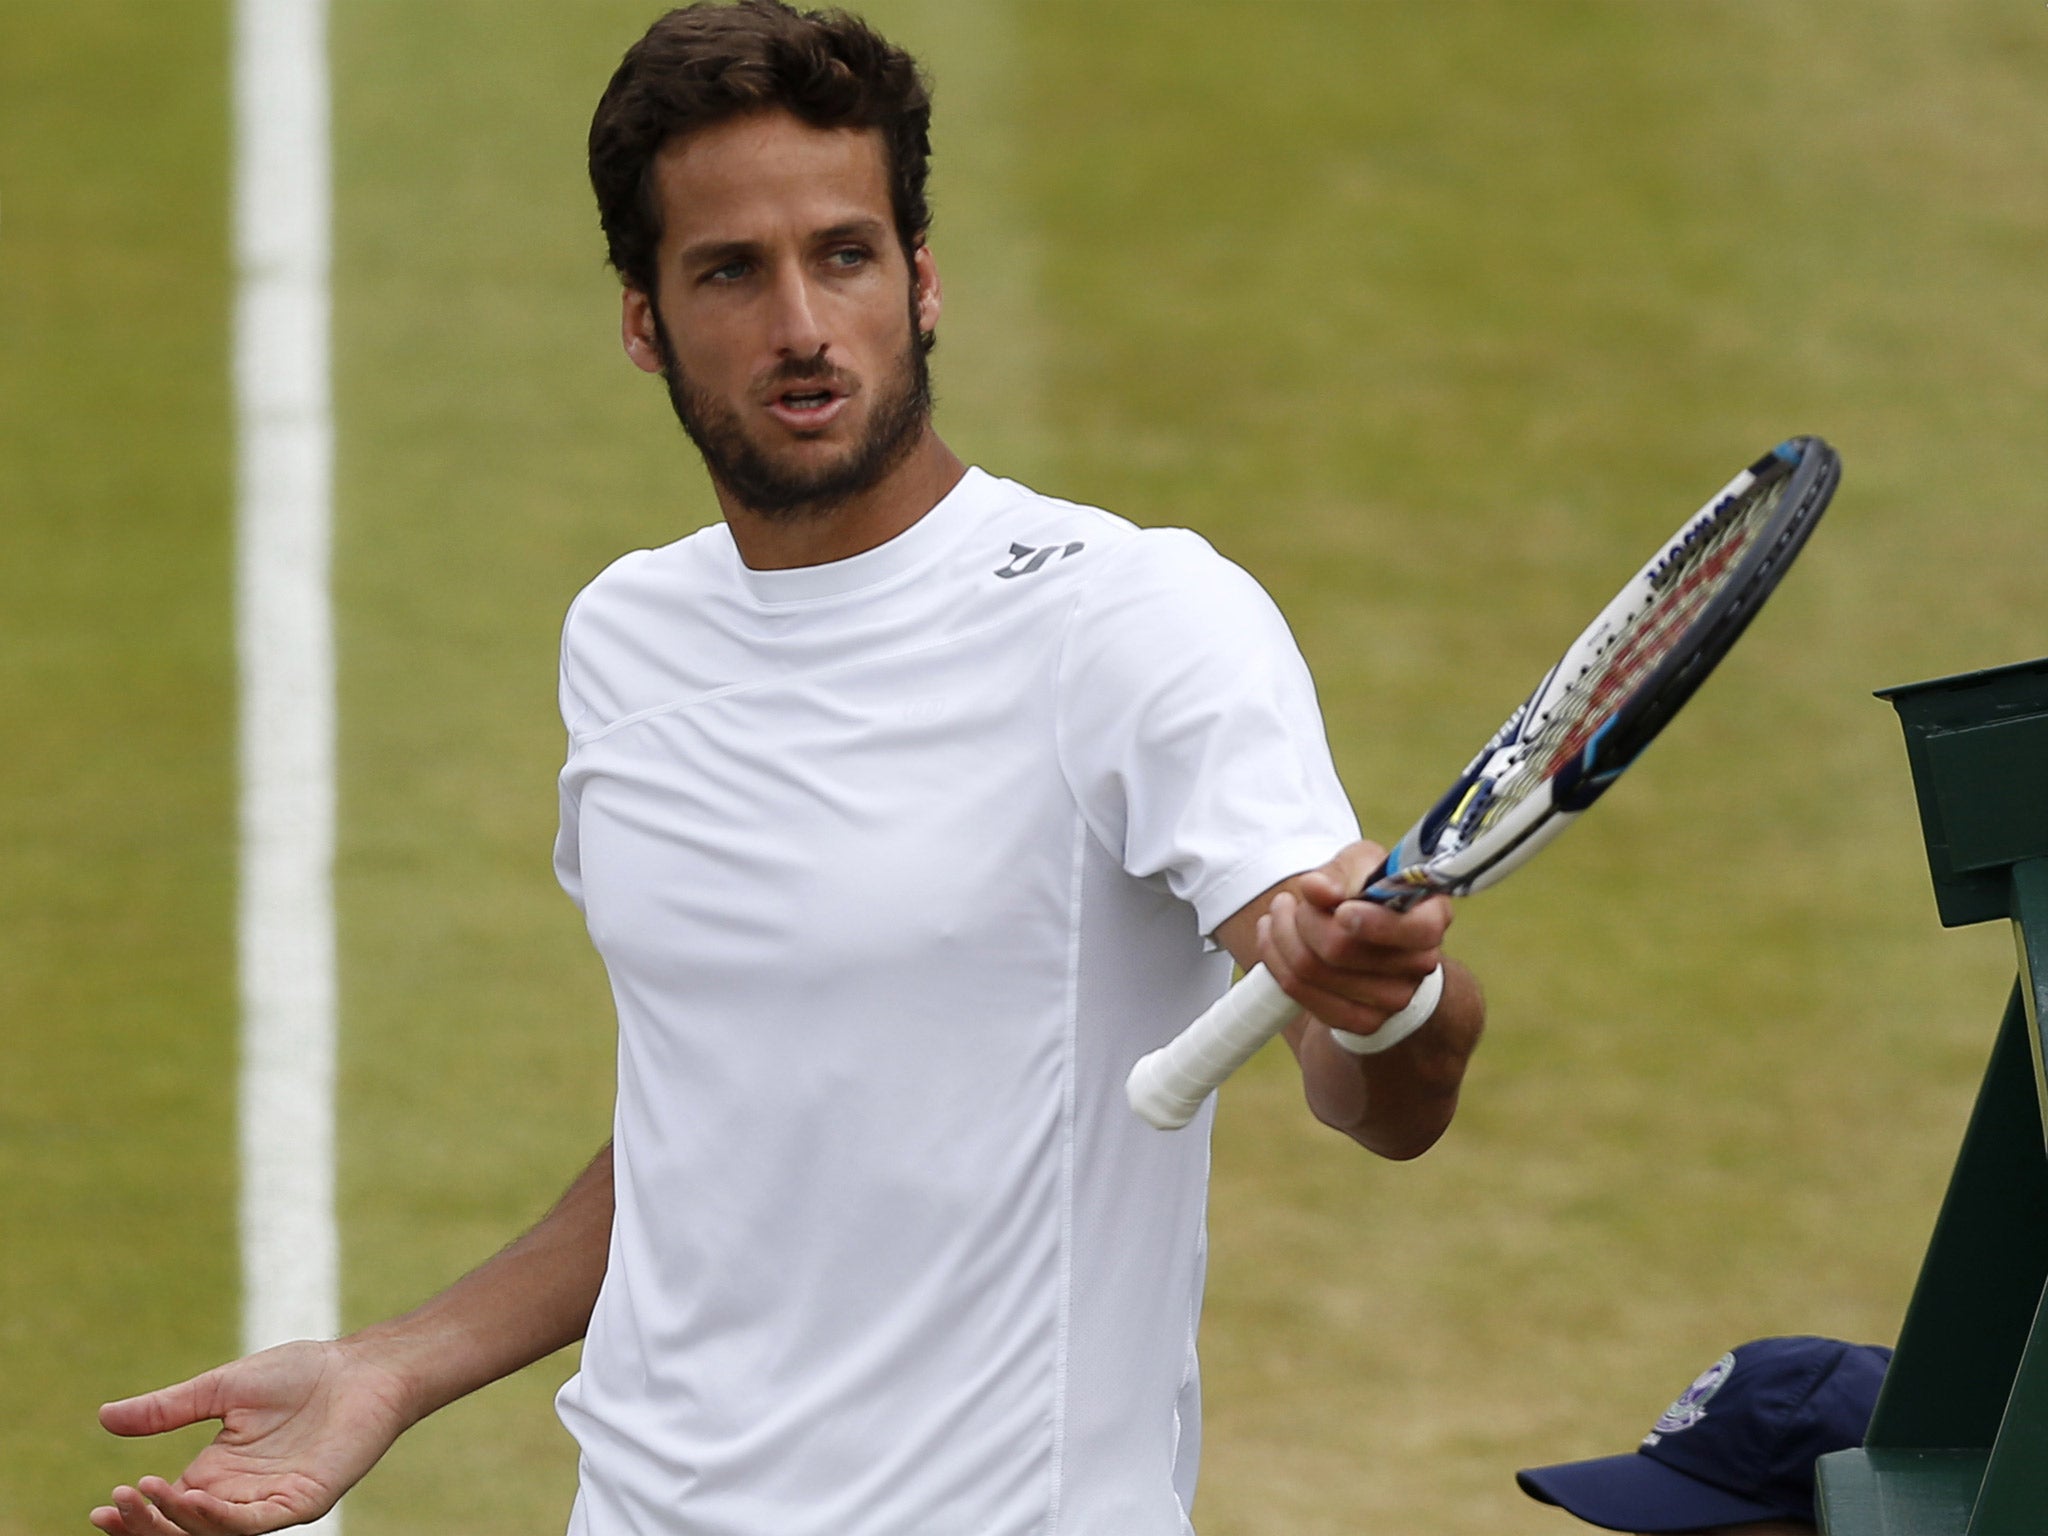 The BBC apologised for Feliciano Lopez's sweary outburst